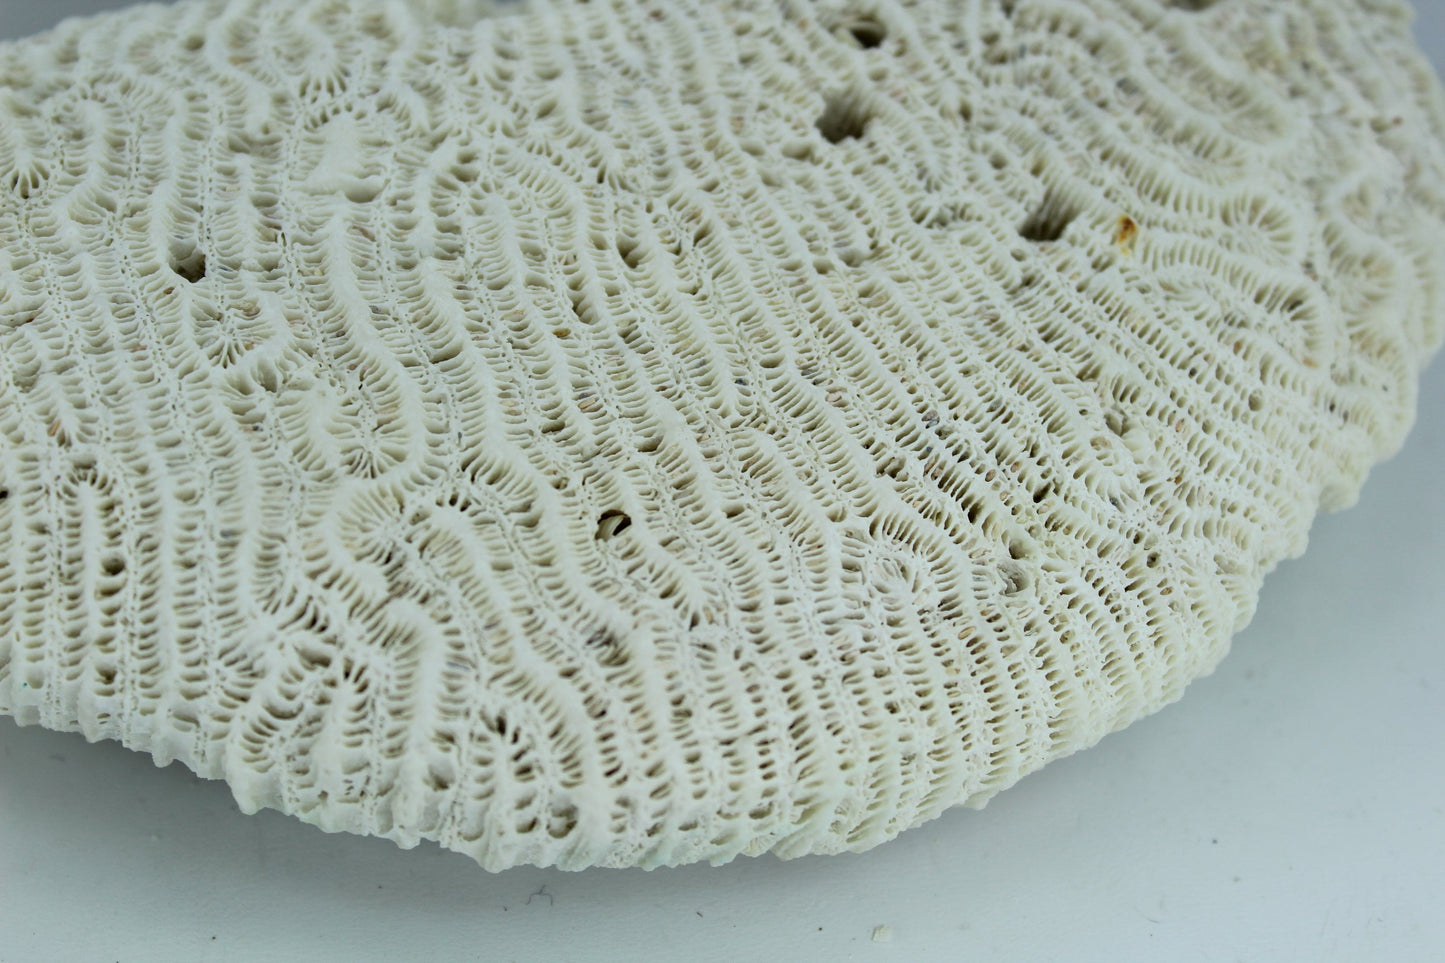 Natural Coral 6 1/2" Half Moon 1960s Estate Collection Aquarium Shell Art Collectibles lovely marked